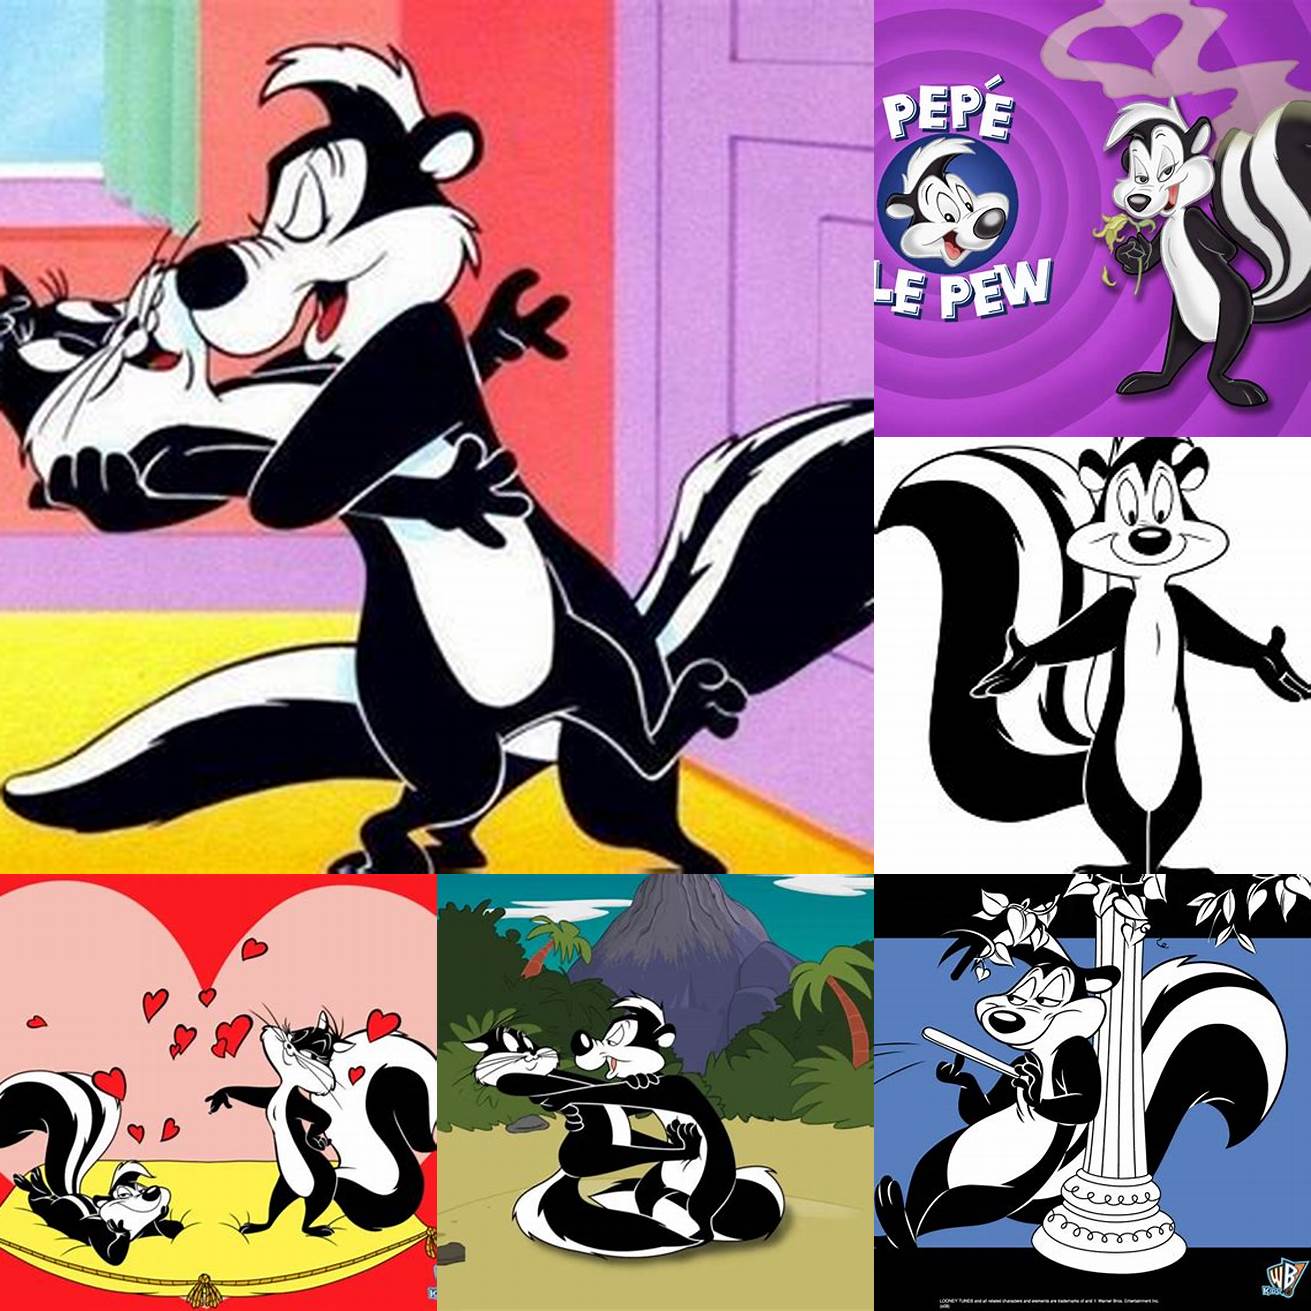 The cat from Pepe Le Pew has been used as a teaching tool for French language classes